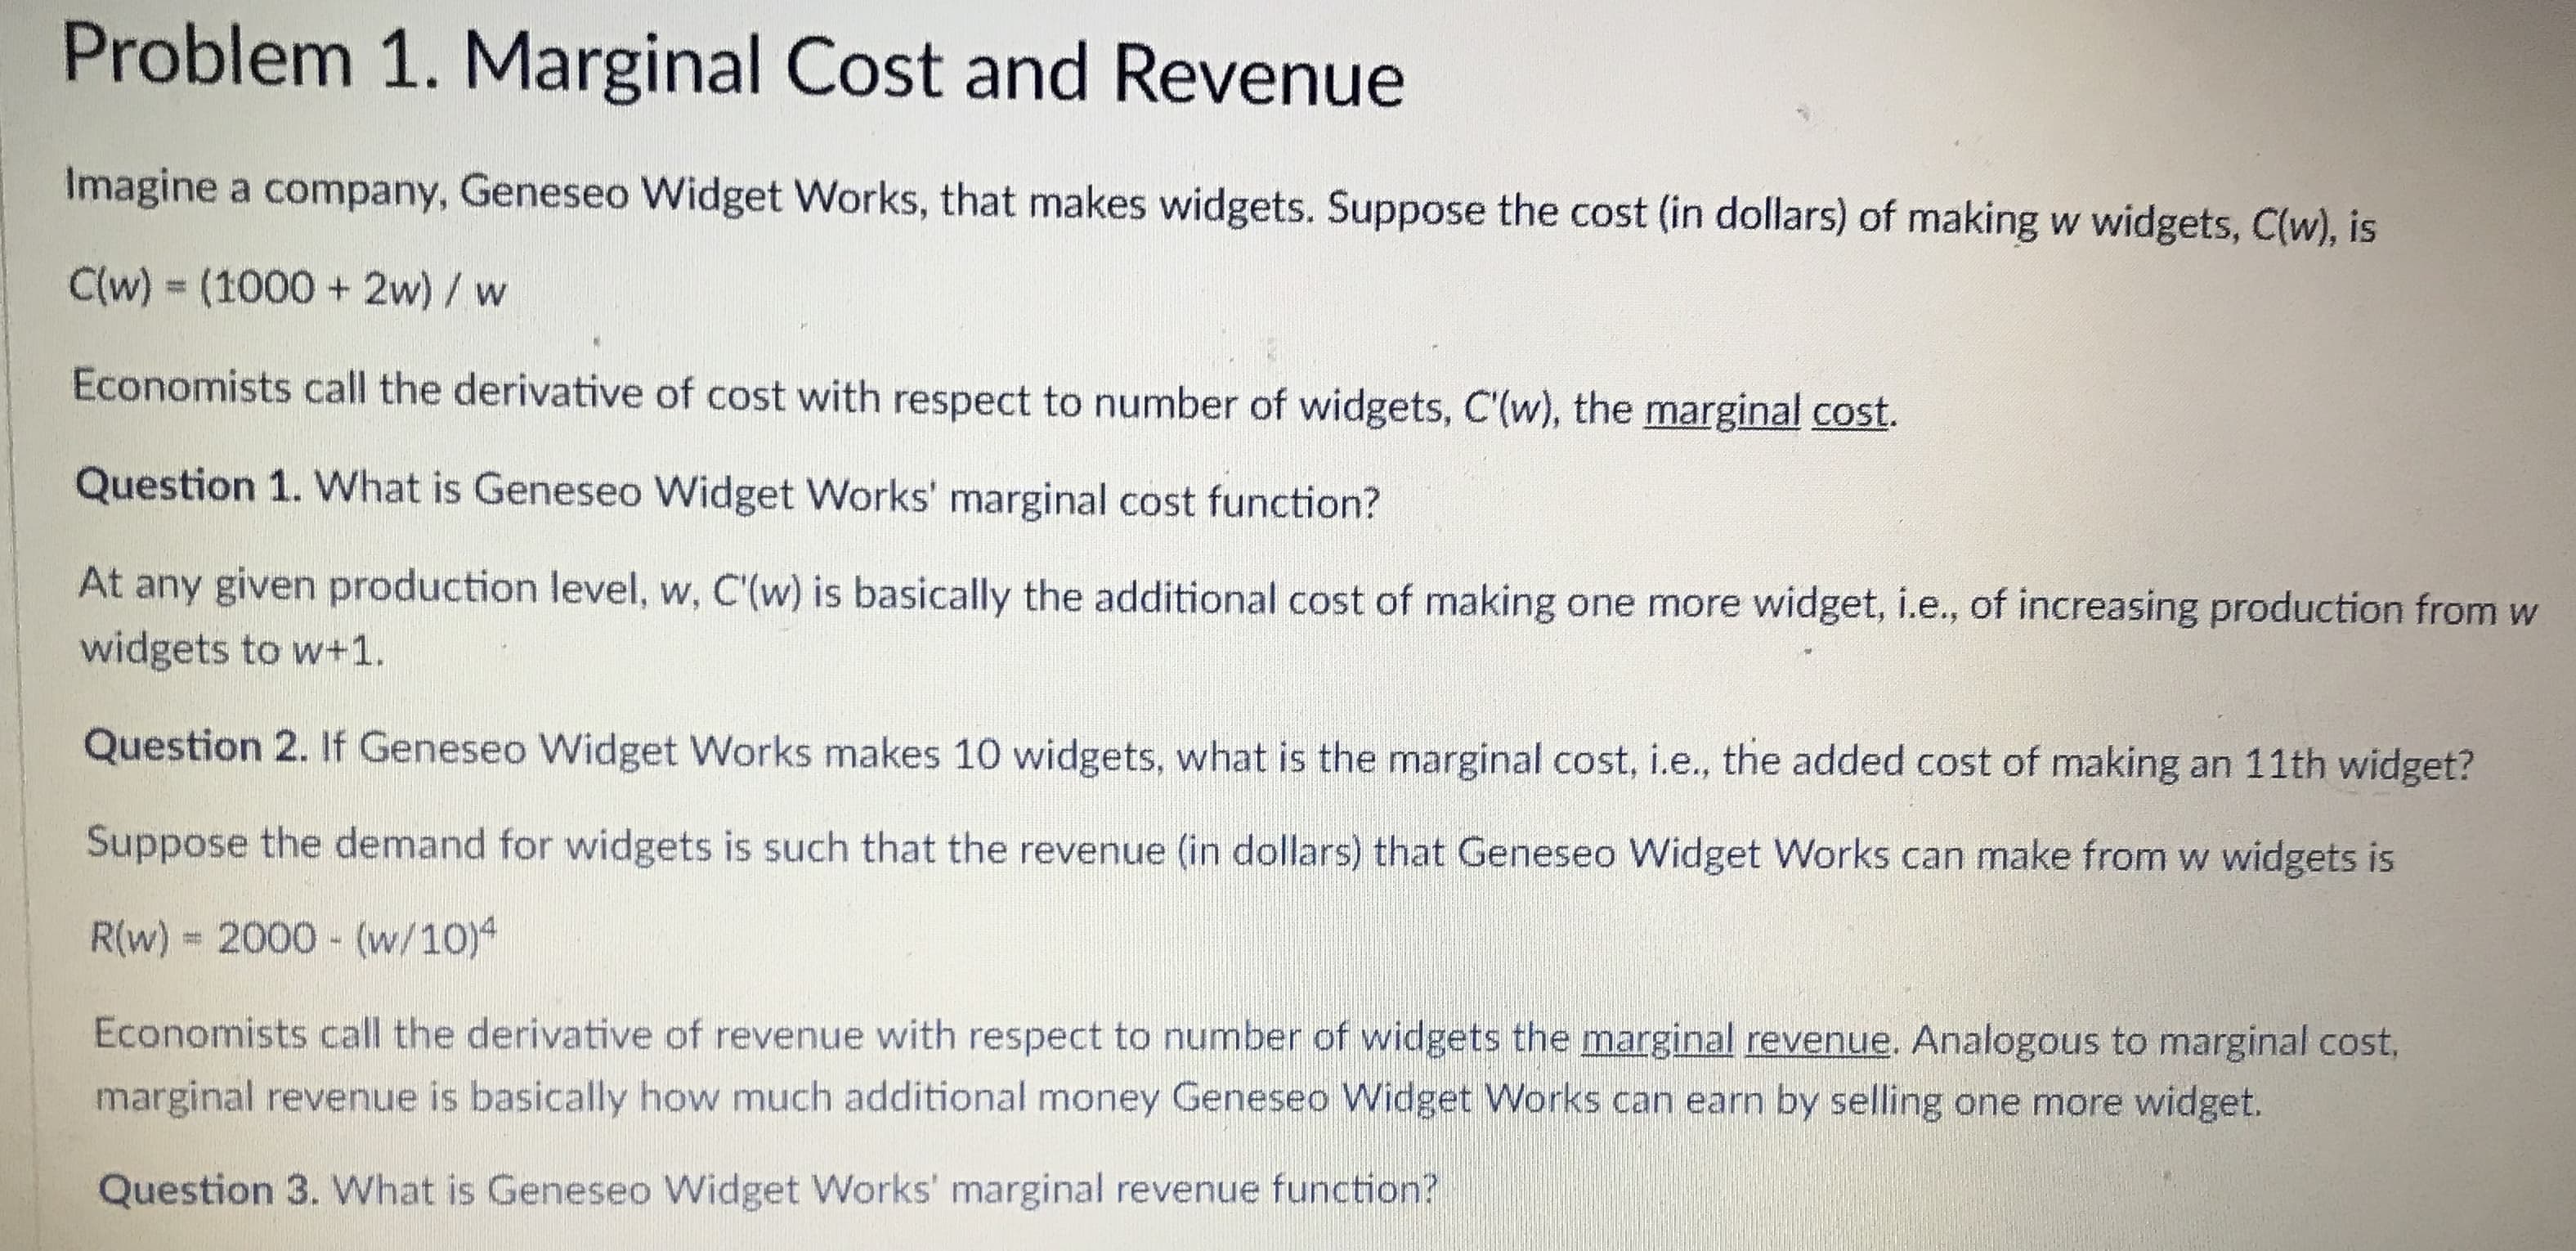 Problem 1. Marginal Cost and Revenue
Imagine
a company, Geneseo Widget Works, that makes widgets. Suppose the cost (in dollars) of making w widgets, C(w, is
C(w) (1000 + 2w)/ w
Economists call the derivative of cost with respect to number of widgets, C'íw), the marginal cost.
Question 1. What is Geneseo Widget Works' marginal cost function?
At any given production level, w, C(w) is basically the additional cost of making one more widget, ie, of increasing production from w
widgets to w+1.
Question 2. If Geneseo Widget Works makes 10 widgets, what is the marginal cost, i.e., the added cost of making an 11th widget?
Suppose the demand for widgets is such that the revenue (in dollars) that Geneseo Widget Works can make from w widgets is
R/w) 2000-(w/1014
Economists call the derivative of revenue with respect to number of widgets the marginal revenue. Analogous to marginal cost,
marginal revenue is basically how much additional money Geneseo Widget Works can earn by selling one more widget.
Question 3. What is Geneseo Widget Works' marginal revenue function?
